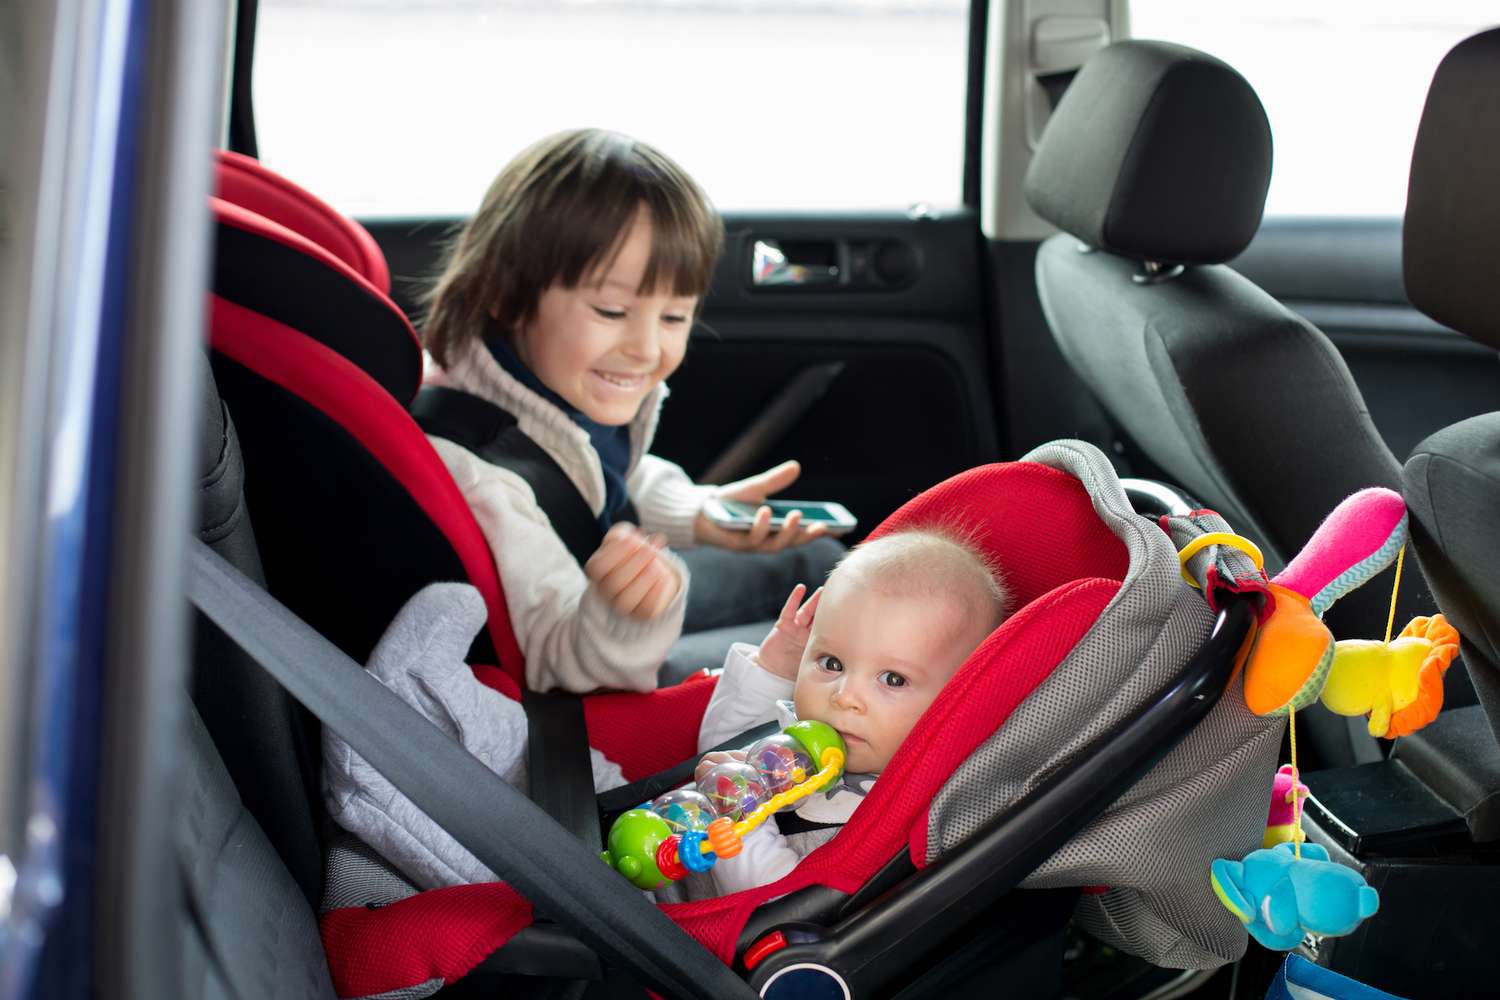 How To Choose The Right Car Seat For Your Child Pas - What Car Seat Does A Five Year Old Need